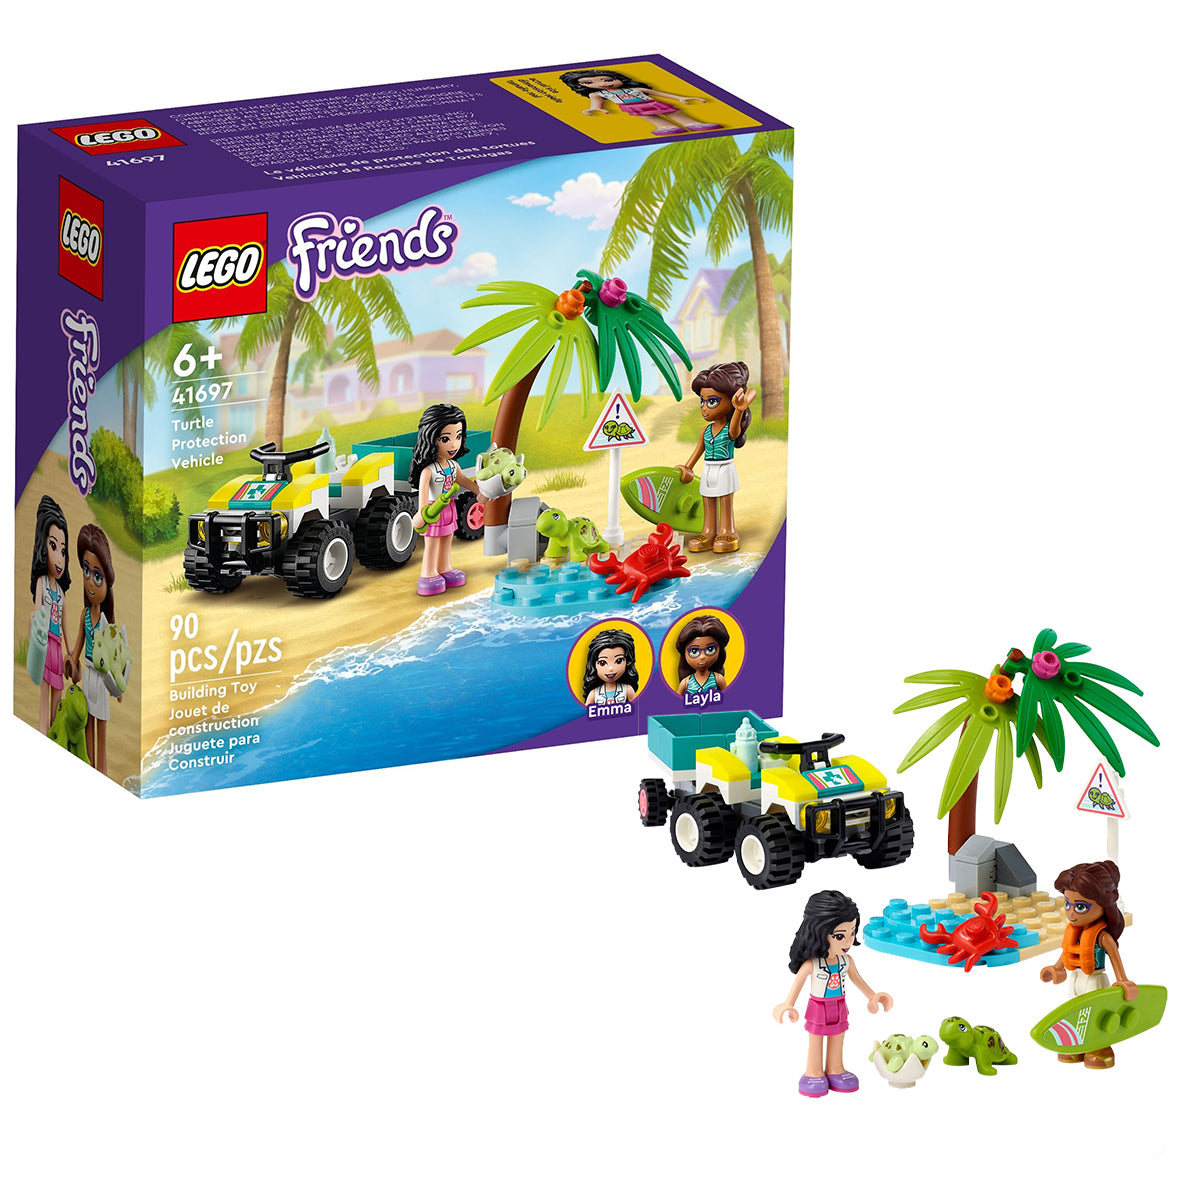 Lego Friends: Turtle Protection Vehicle (7572198588640)